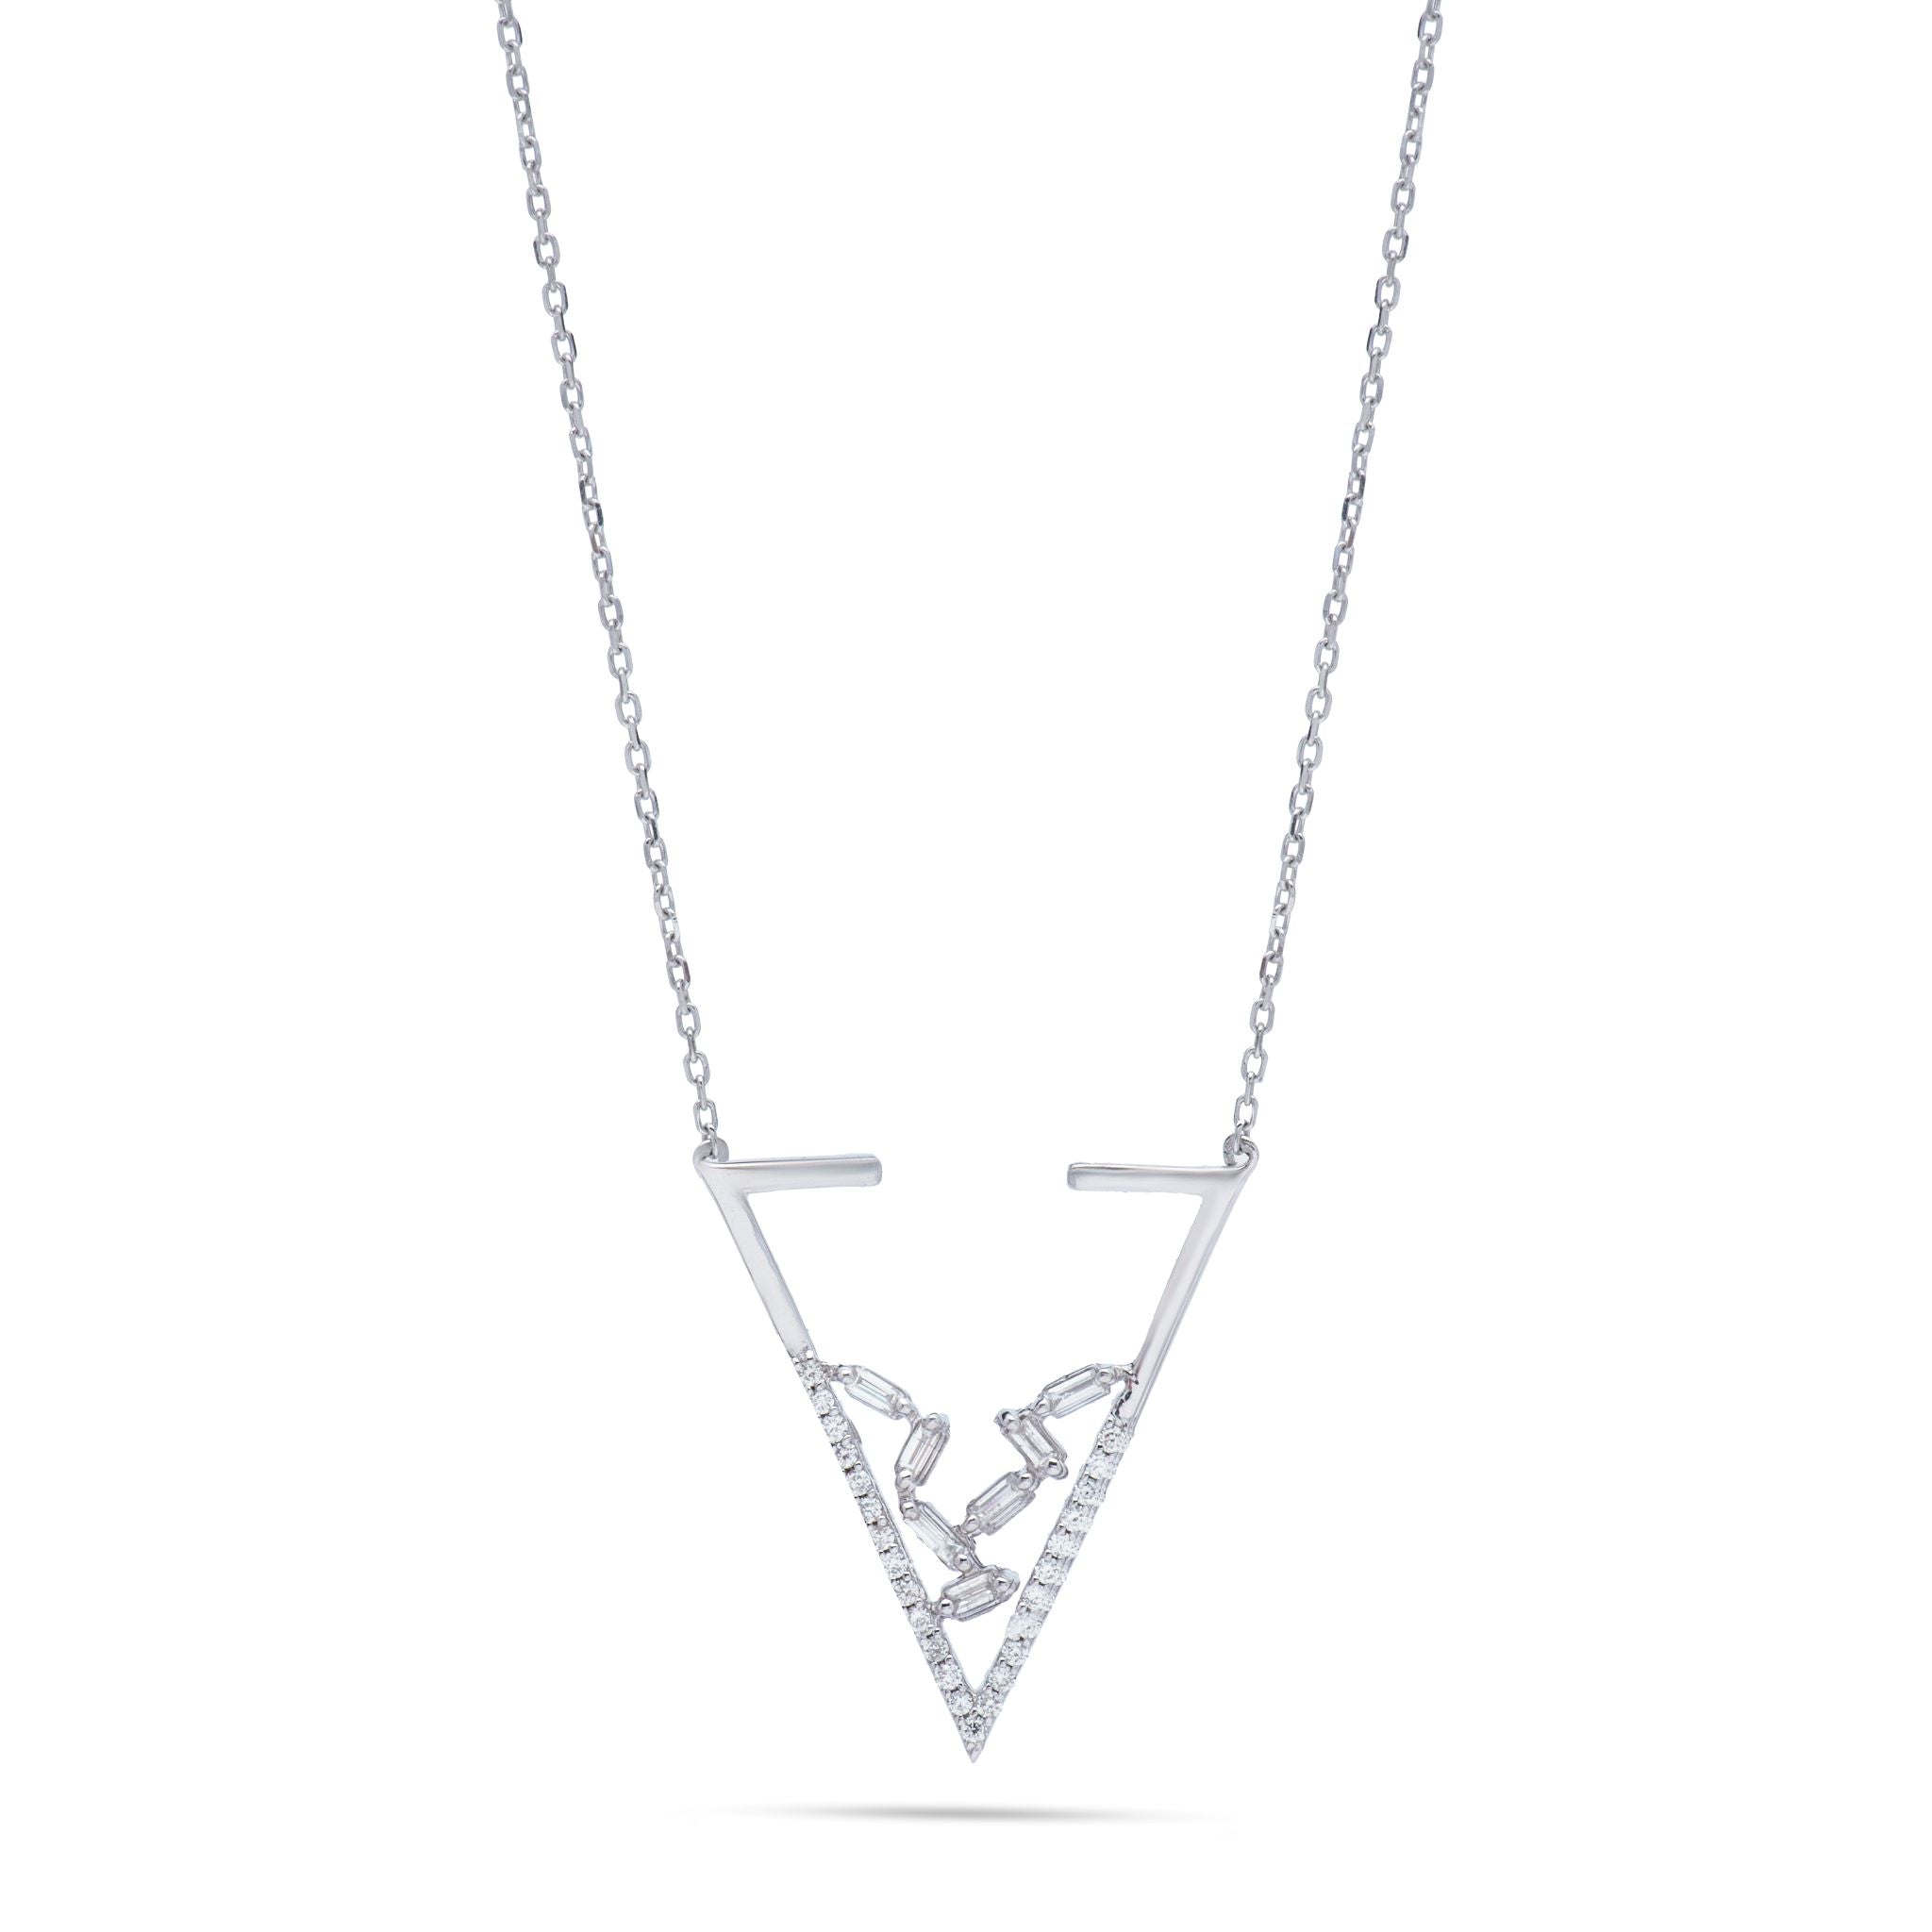 Unique Diamond Triangle with Leaves necklace in white 18K Gold - SIR1227